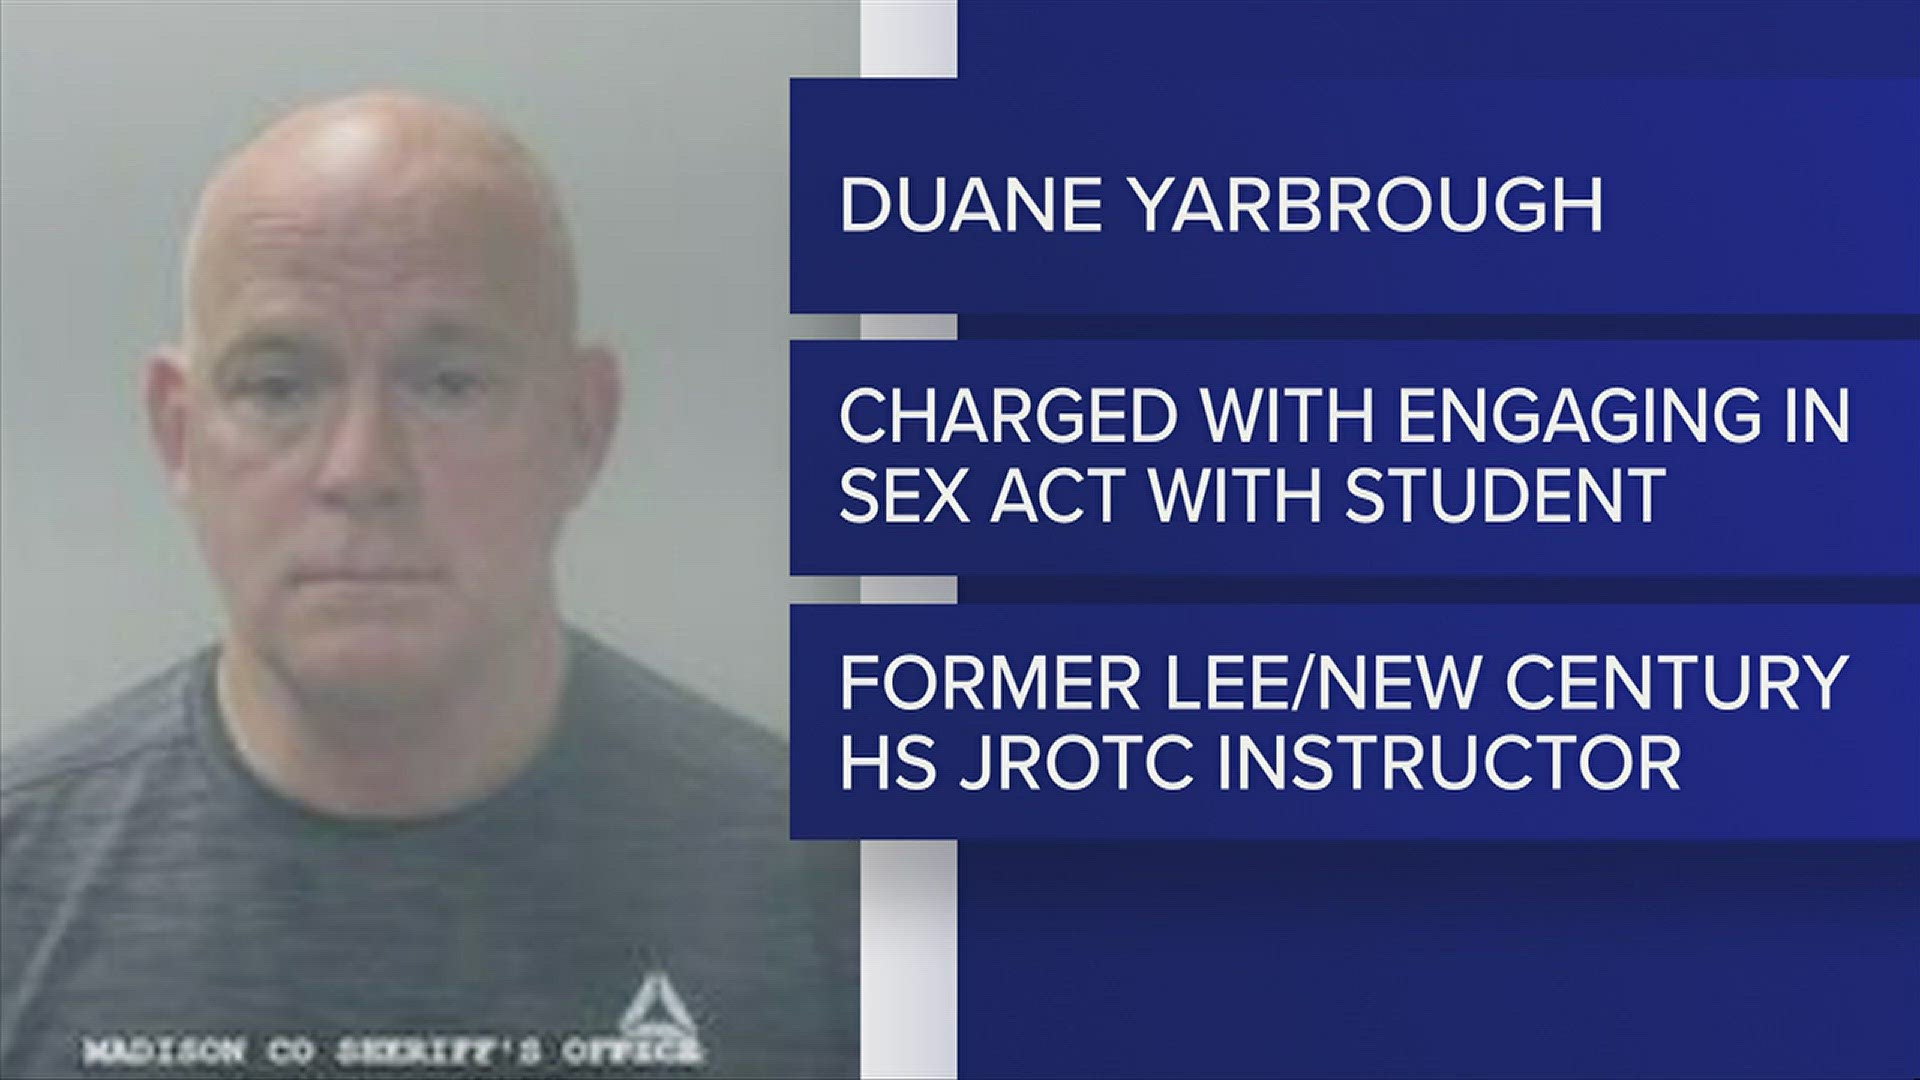 The former JROTC instructor was charged with engaging in a sex act with a student.